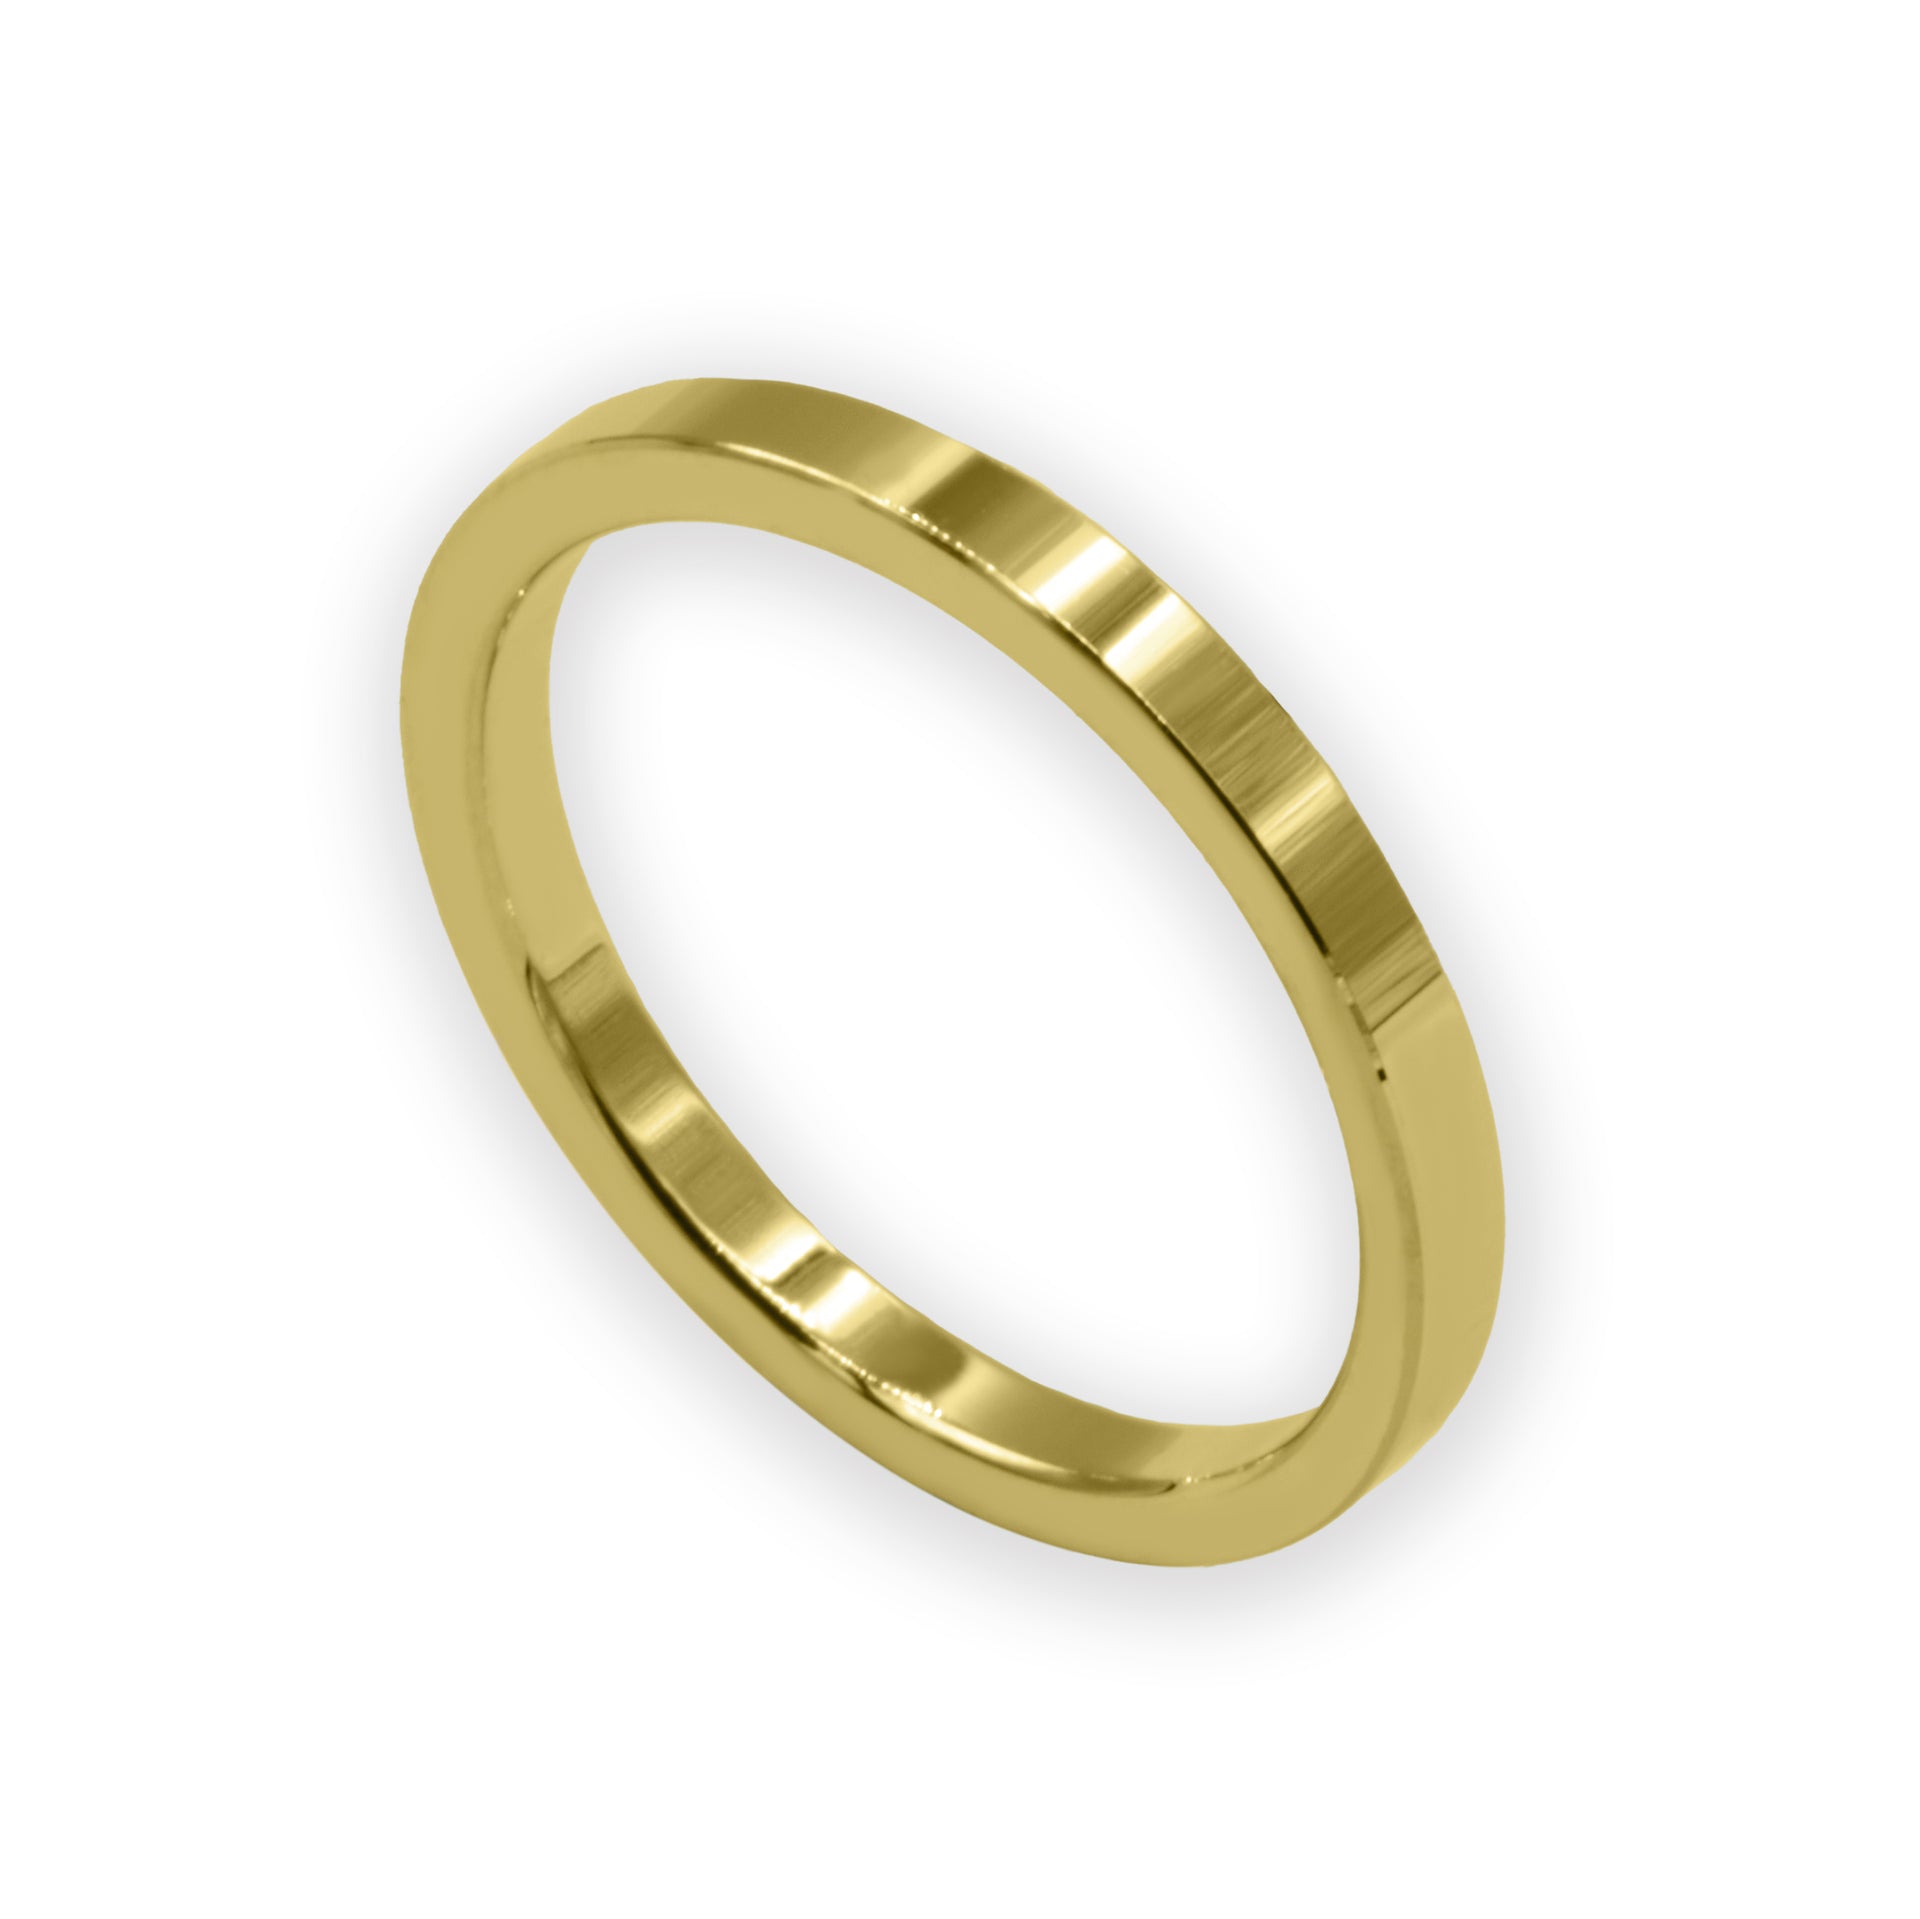 Bague EARTH IS ROUND 2mm profil plat or jaune 18k